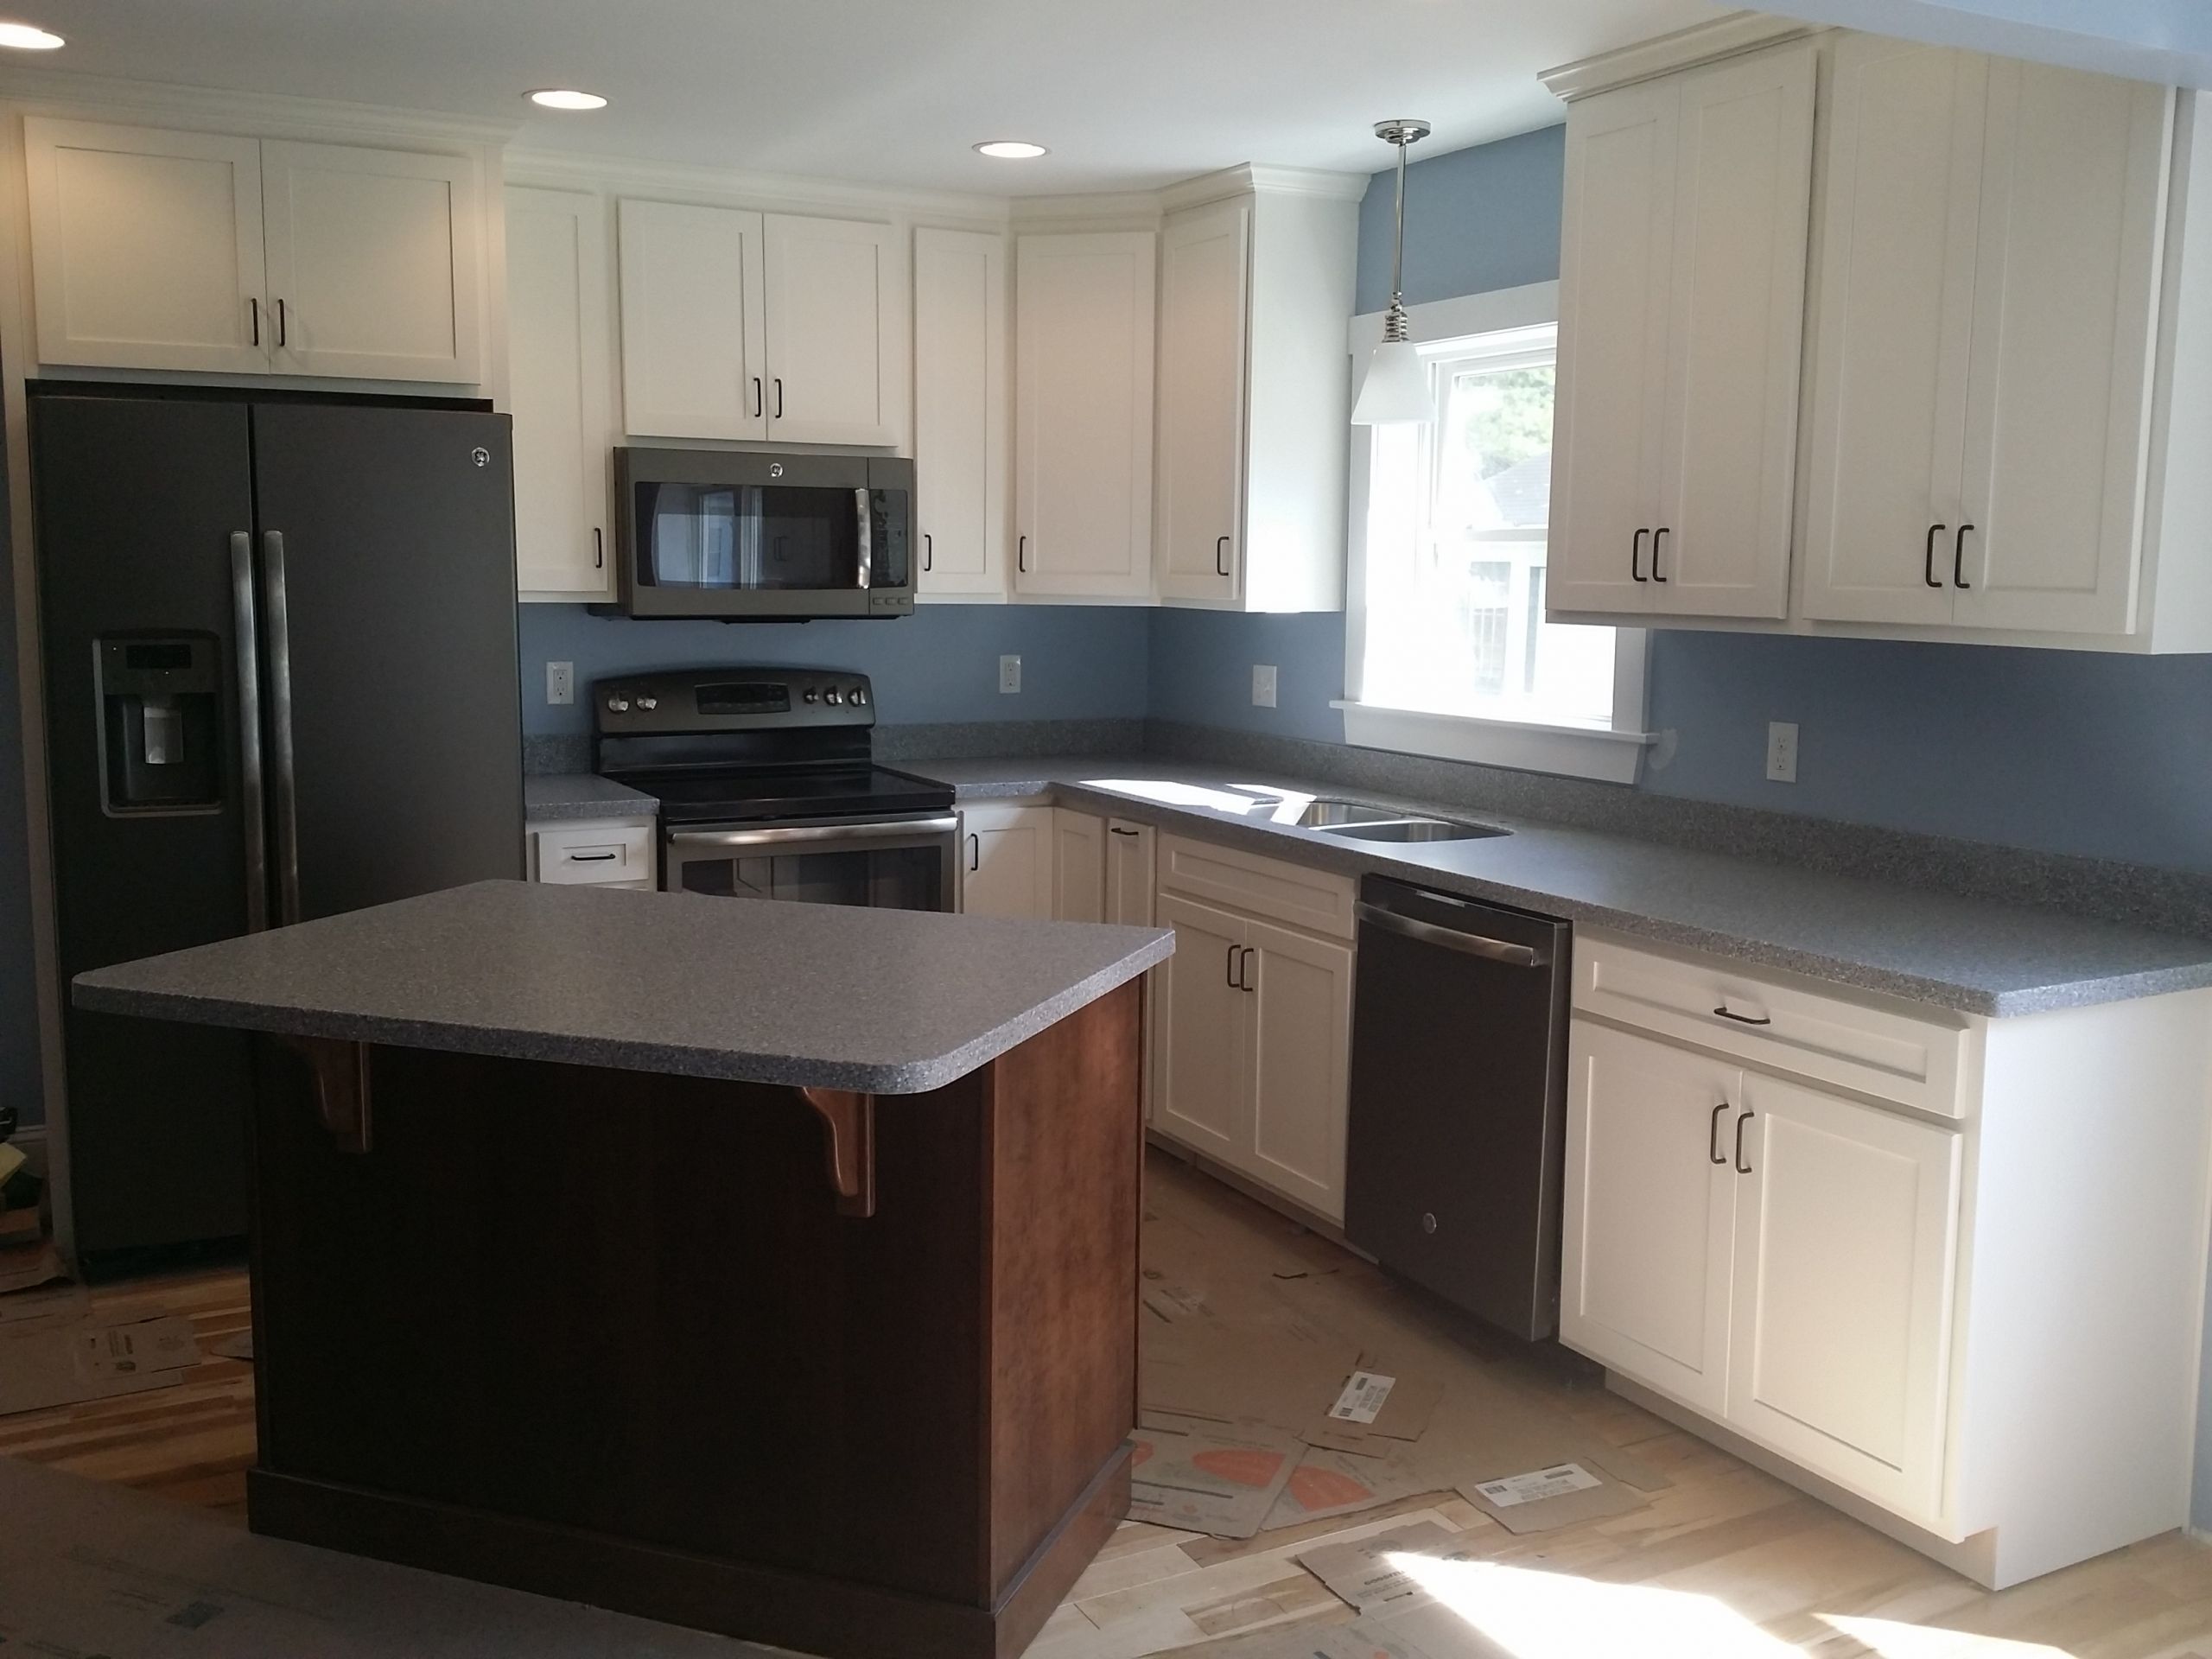 Lowes Kitchen Remodel Reviews
 Interior Appealing Design Lowes Kitchen Remodel For